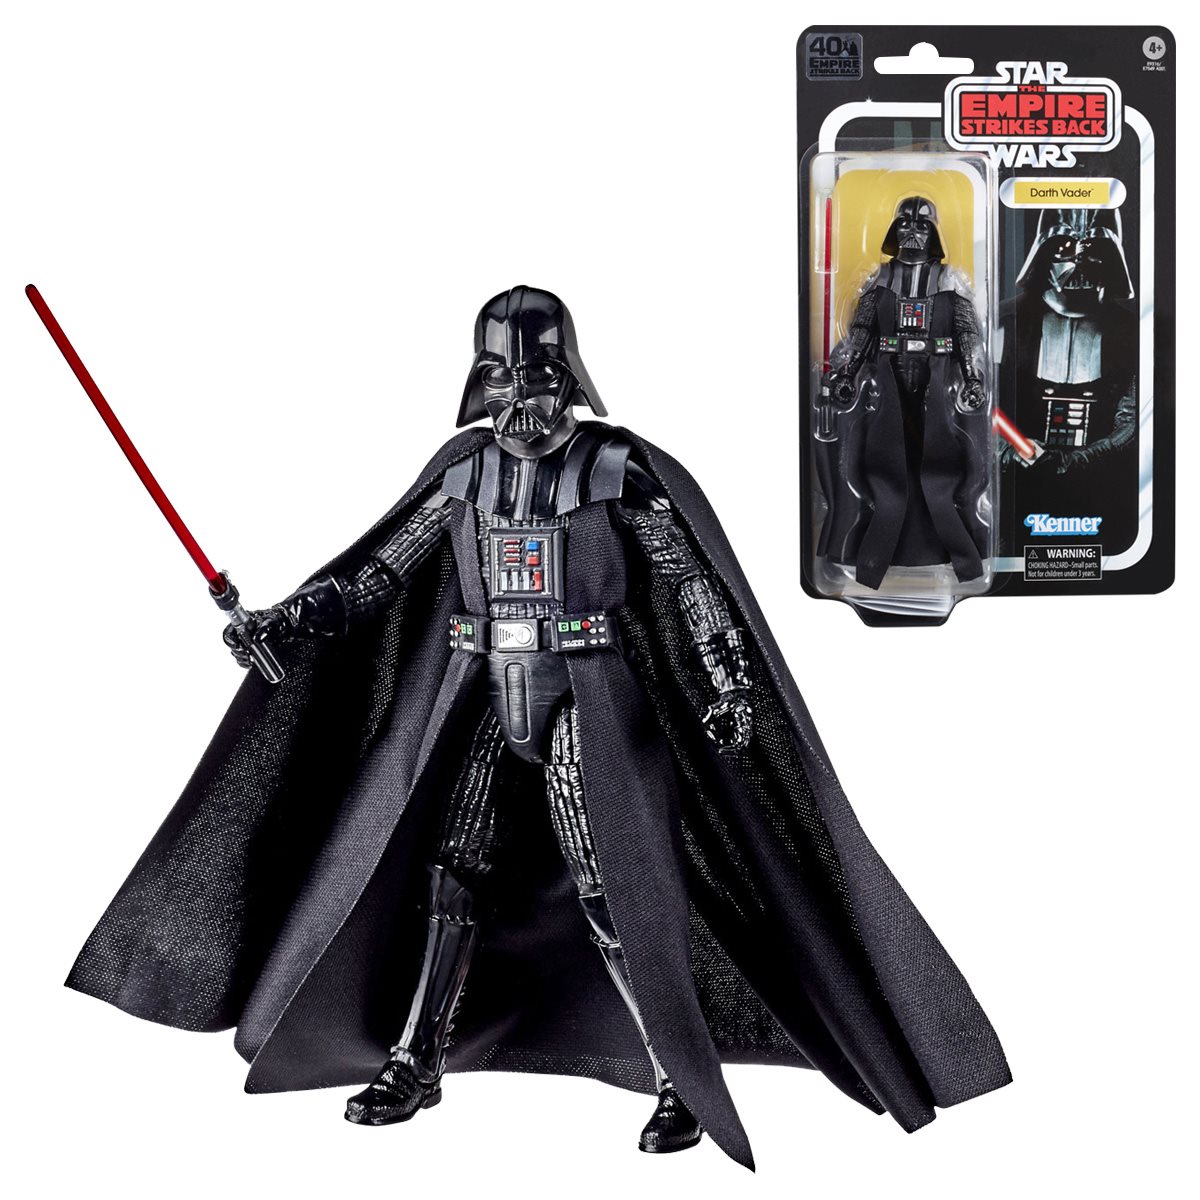 Details about   Star Wars 40th Empire Strikes Back Carbonized DARTH VADER Black Series 6"Figure 